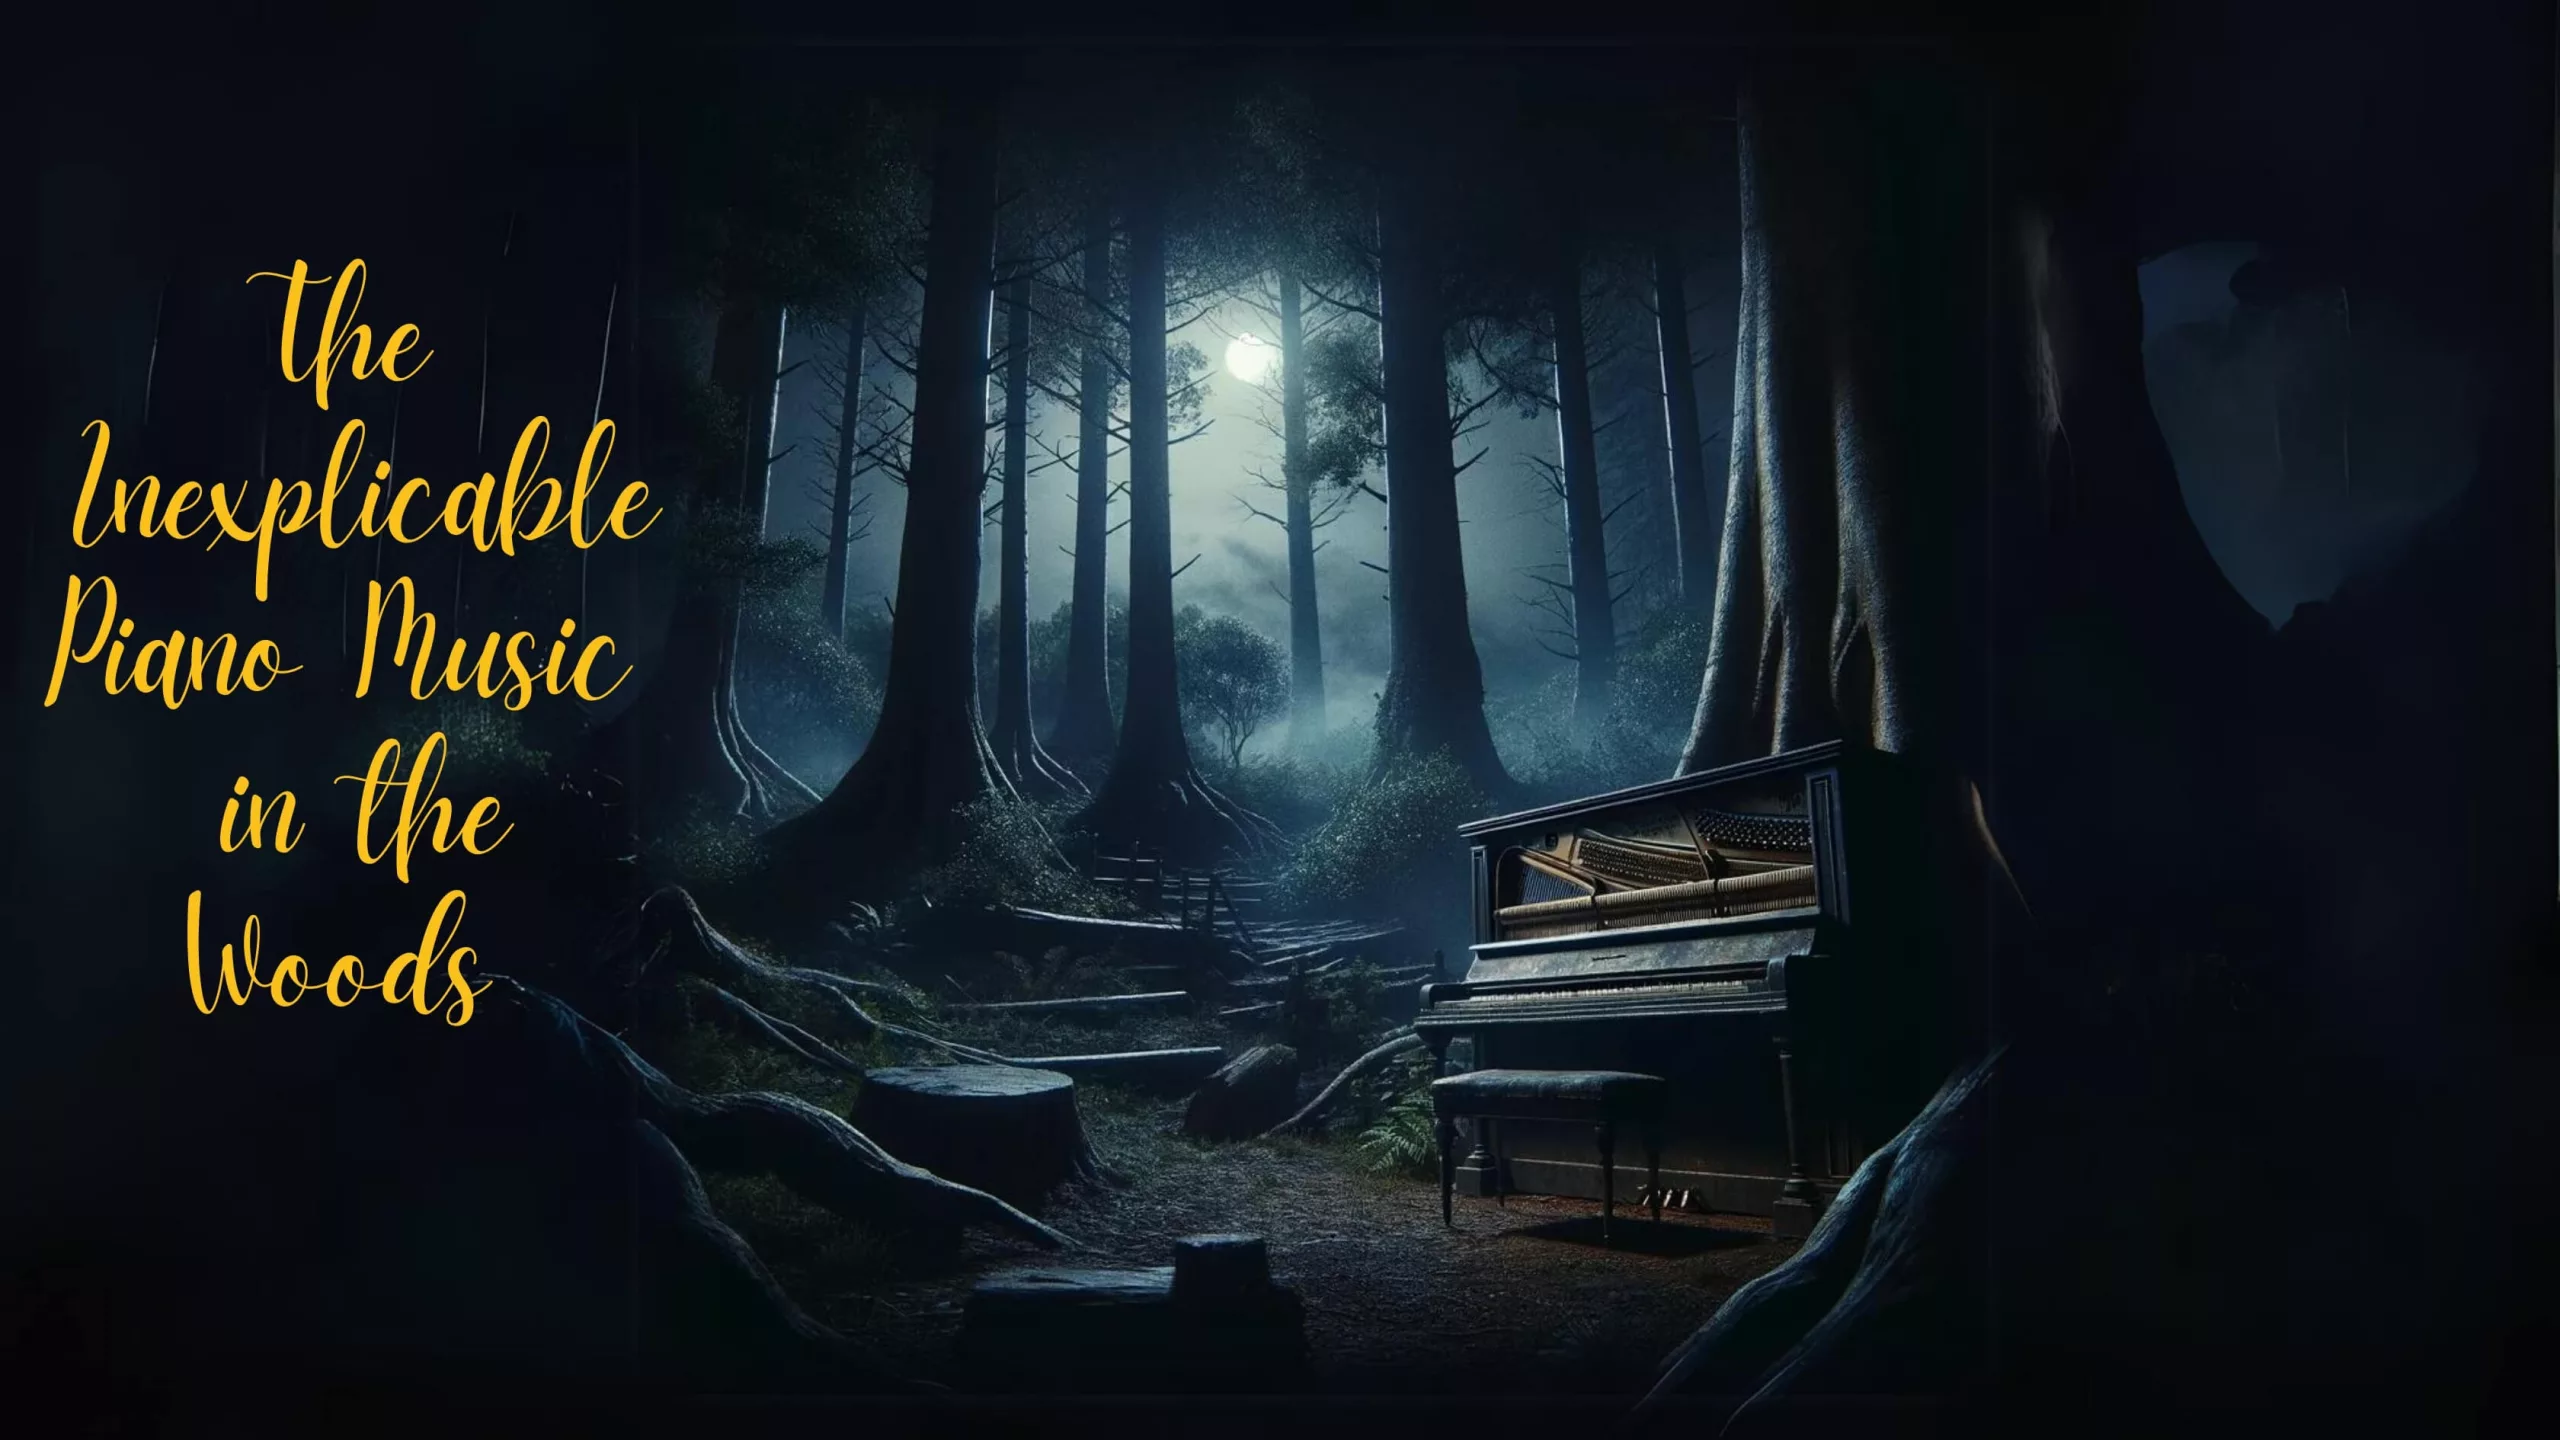 The Inexplicable Piano Music in the Woods